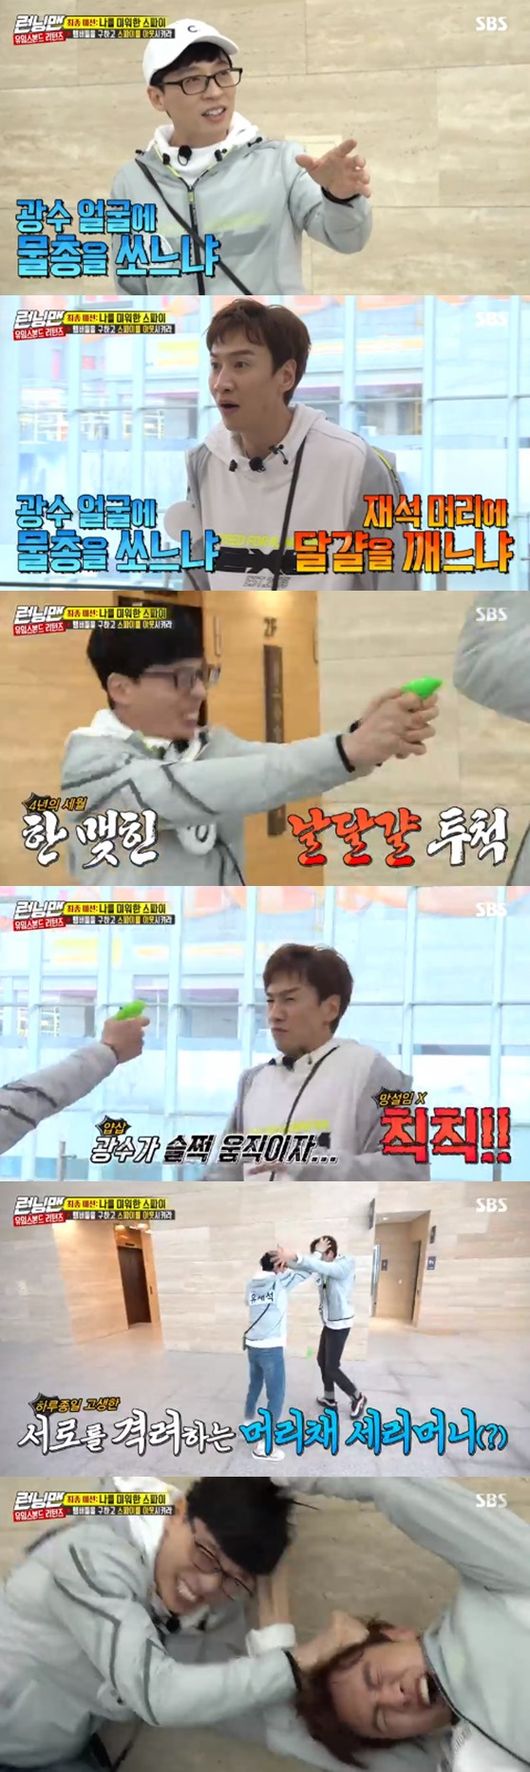 Running Man Uims Bond Yoo Jae-Suk caught Spy Lee Kwang-soo with Bond Girl EsomOn the 28th SBS entertainment Running Man, the main actors Esom, Kim Kyung Nam, and the movie My Special Brother, including Yoo Jae-Suk, Ji Suk-jin, Kim Jong-kook, Haha, Song Ji Hyo, Lee Kwang-soo, Jeon So-min, Yang Se-chan and the movie My Special Brother The image of him was on the air.On this day, the members talked about Kim Jong-kook concert at the opening remarks.In particular, Jeon So-min said, My parents also watched the performance together. My mother actually saw Kim Jong-kook.He wanted to be his son-in-law, and when Kim Jong-kook was delighted, Yoo Jae-Suk added that he was a little bit because of the age difference and disappointed Kim Jong-kook.Since then, guest Esom and Kim Kyung Nam have appeared, and they have moved to a place with numerous containers.The billboard there had a prize of 100 million One, and the crew said, You can spend one-ninth of the money you spend on 100 million One.We prohibit the possession of personal goods for only nine hours, and the price here is different from the real world. Since then, the game has started in earnest, and the members have been eating food without care.Dirty Bull moth Lee Kwang-soo was suspected of not eating it, and suddenly he was shopping for storm interphones and laughed.In the meantime, Esom secretly handed a note to Yoo Jae-Suk and informed him that he was Bond Girl and he was Bond Bond.Embarrassed, Yoo Jae-Suk once purchased water guns and solutions, and members from the containers tried to find 1.93 million One, the N-th of the money left in their respective safes.At this time, the crew informed Yoo Jae-Suk, Shoot water guns on the members name tags to treat Don Dok, and if you find Spy, you should shoot water guns in your face.Yoo Jae-Suk treated the members who found their respective safes with careful care and suspected Kim Kyung-nam as Spy, but Spy was separate.It was Lee Kwang-soo, who was named host S.Four years ago, to humiliate, Lee Kwang-soo also performed a mission with Careful and found out the Yoo Jae-Suks egg throw on the head mission.The pair faced again in tight tension and Yoo Jae-Suk shot the water gun first to win.Still, Lee Kwang-soo also cursed by throwing eggs and the two fought by holding their hair, causing laughter; followed by Shin Ha-kyun as host S.He promised to reappear again if this movie exceeds 5 million, as well as performing Lee Kwang-soos penalty penalty and laughing.Meanwhile, My Special Brother is a human comedy about the friendship of two men who have lived like a body for 20 years, though they have not mixed a drop of blood with their hairy brother, Seha (Shin Ha-kyun), and their little-body brother, Dong-gu (Lee Kwang-soo), which will be released at national theaters on May 1.Running Man screen captures